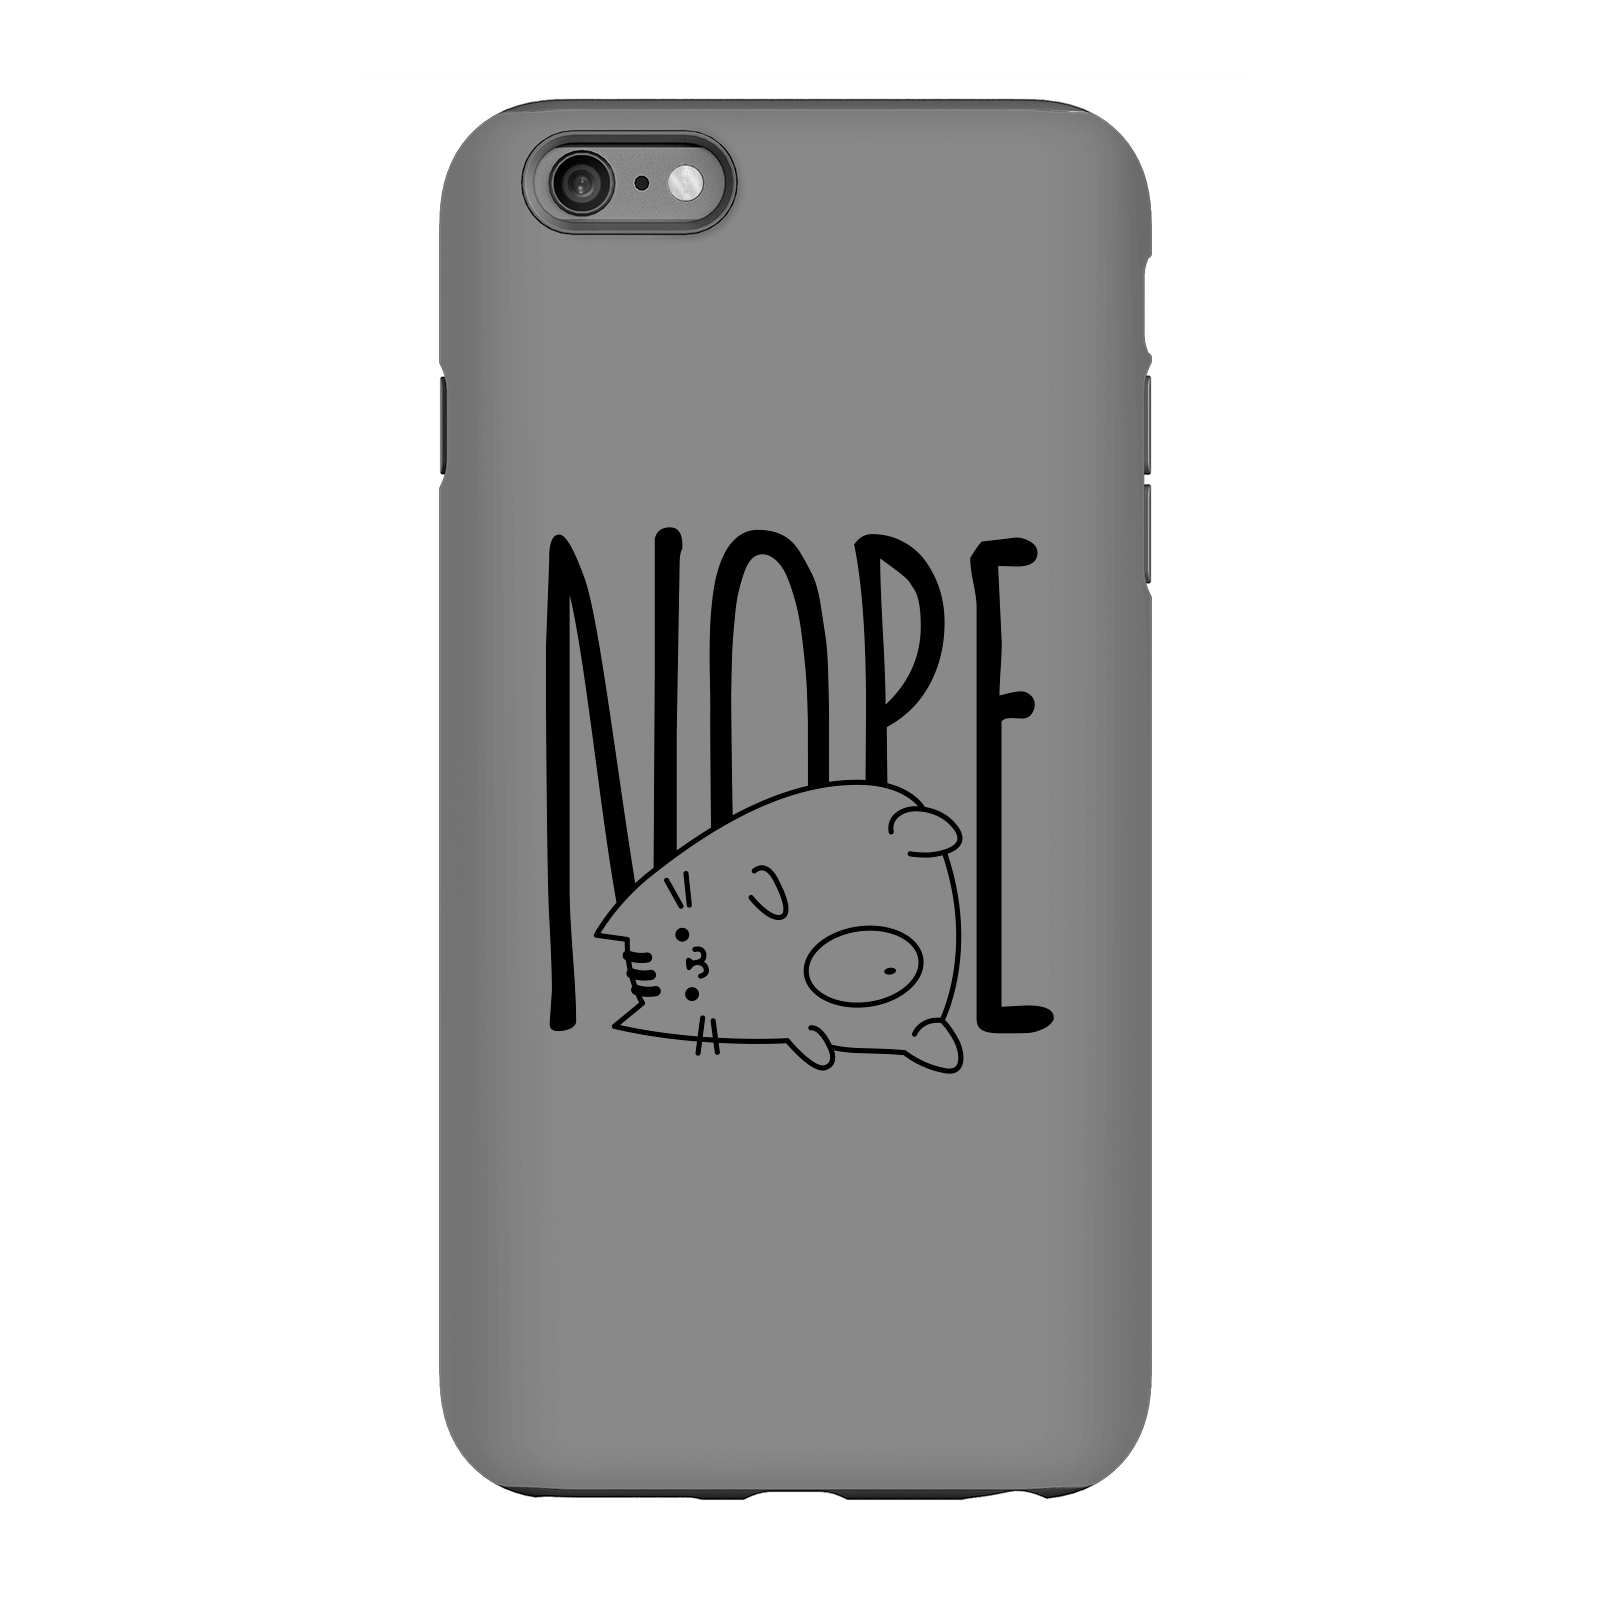 Nope Phone Case for iPhone and Android - iPhone 6 Plus - Tough Case - Gloss